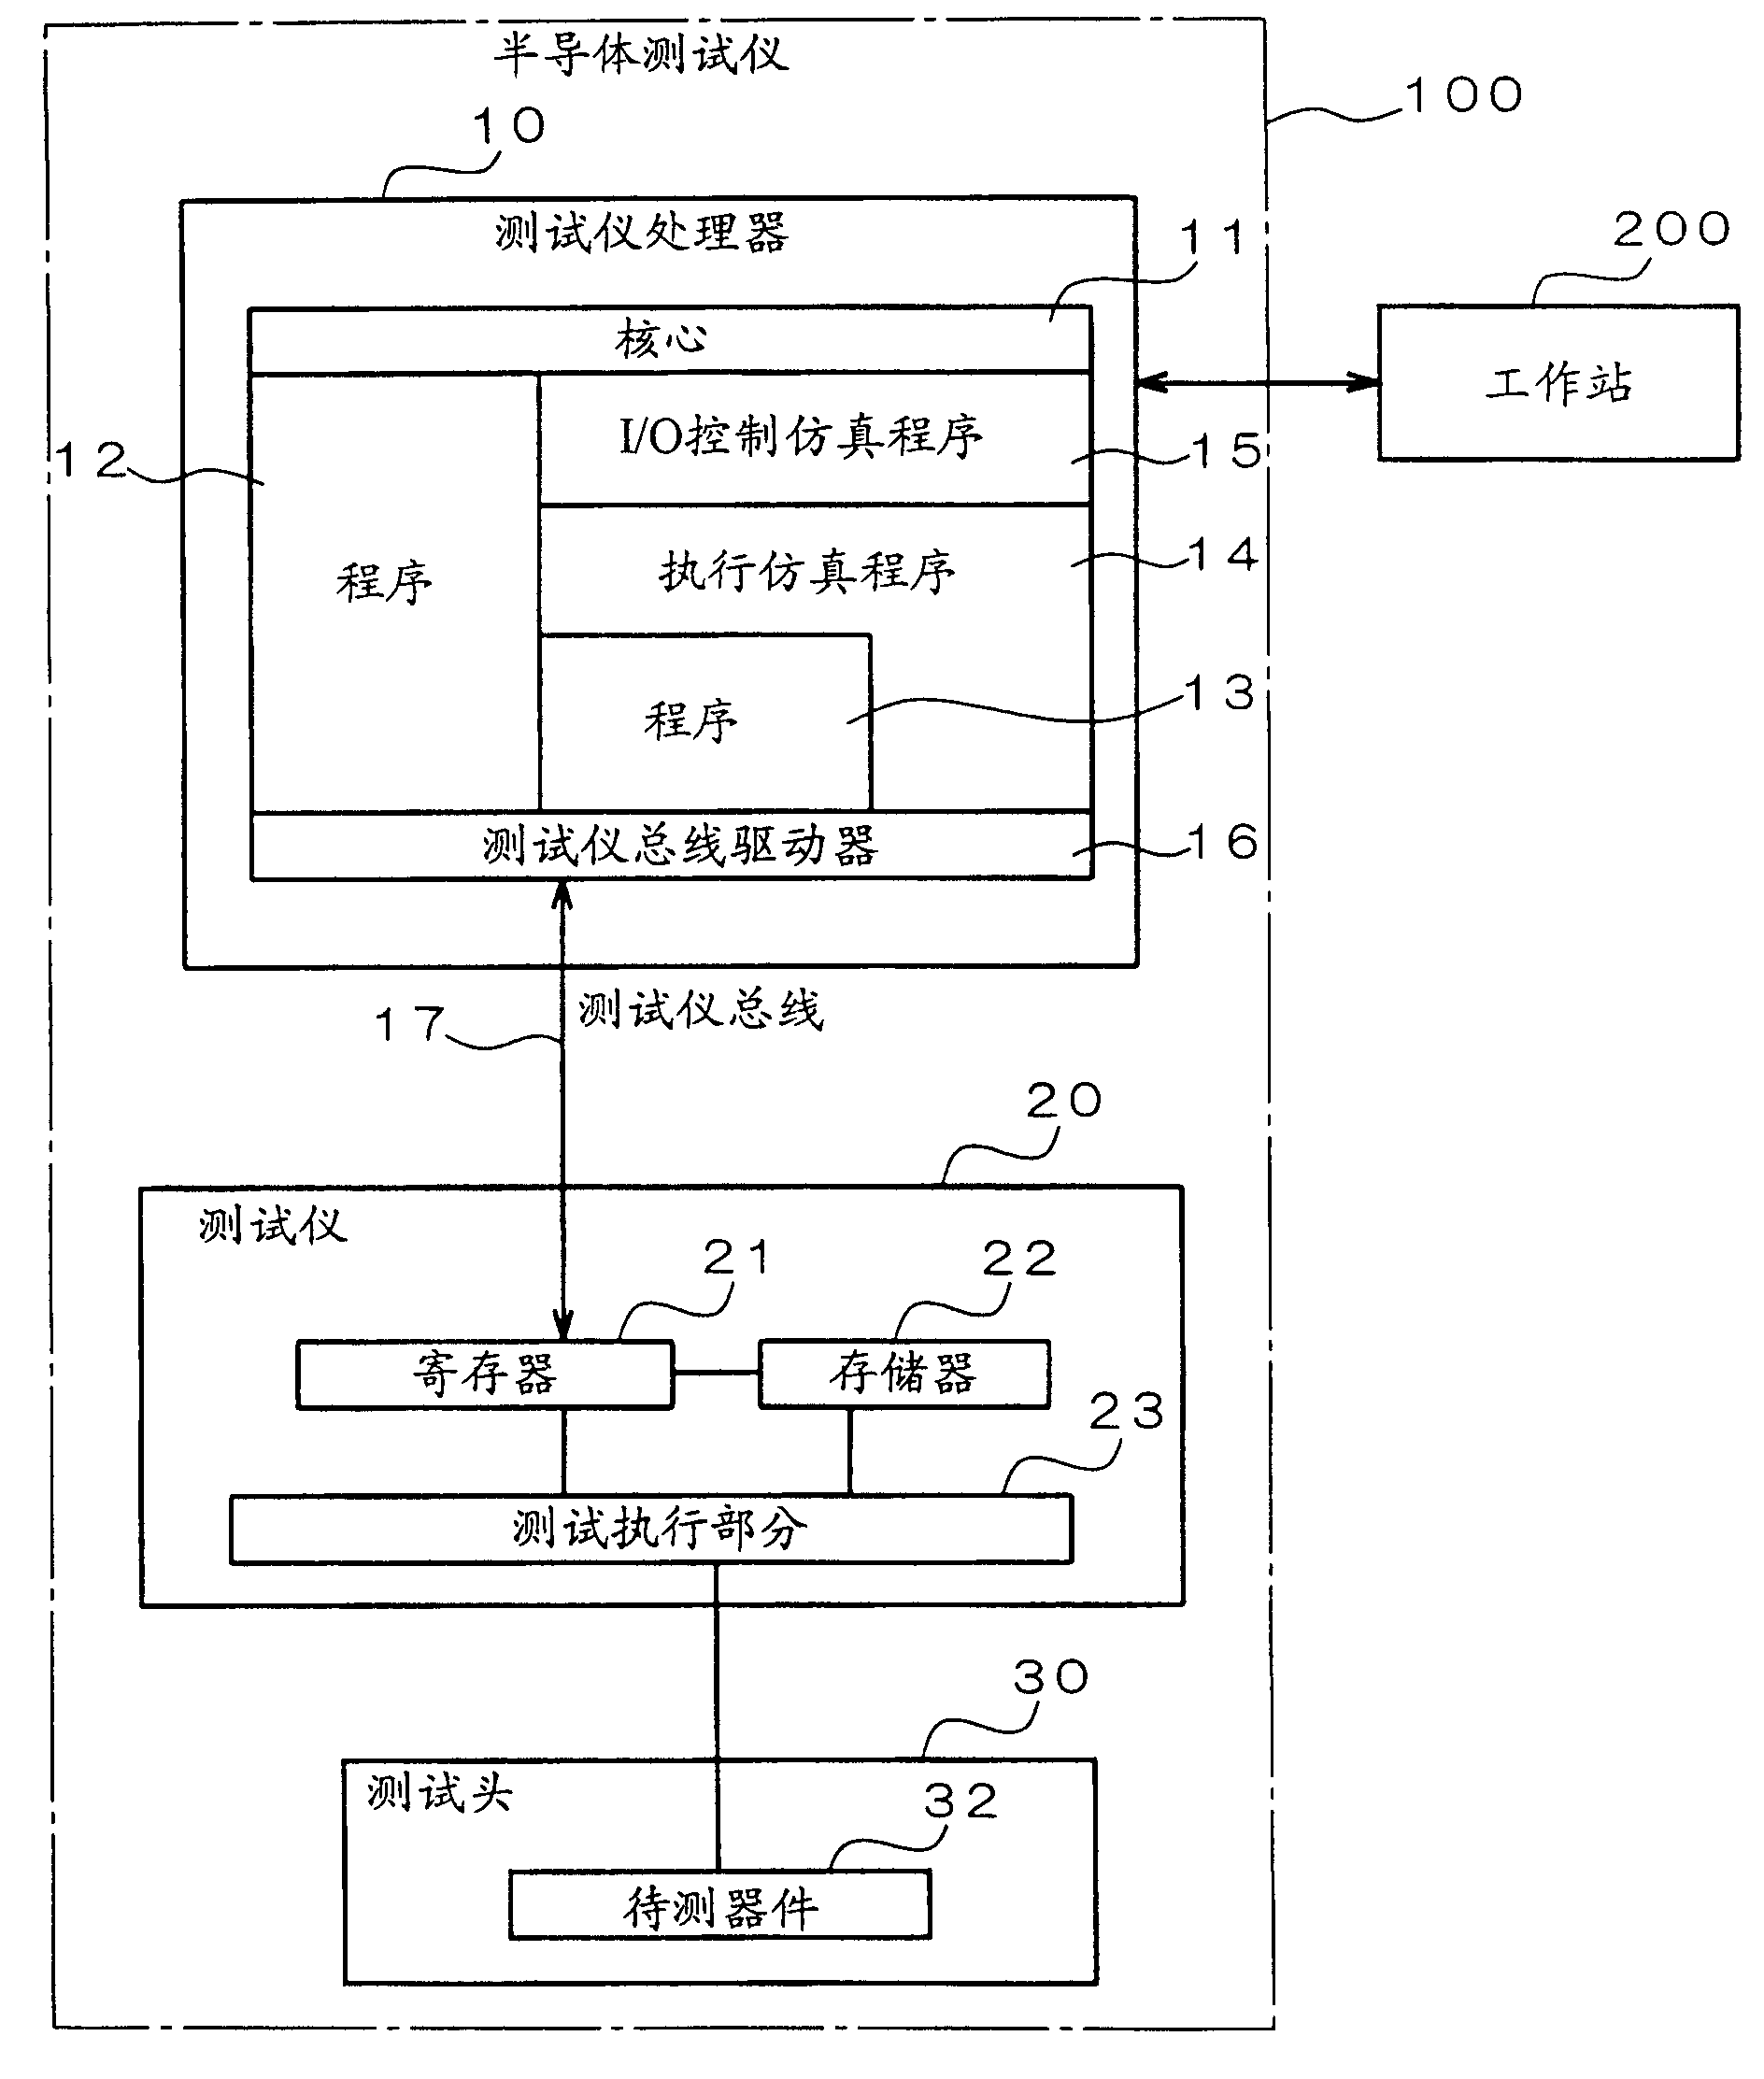 Program executive system for semi-conductor test instrument